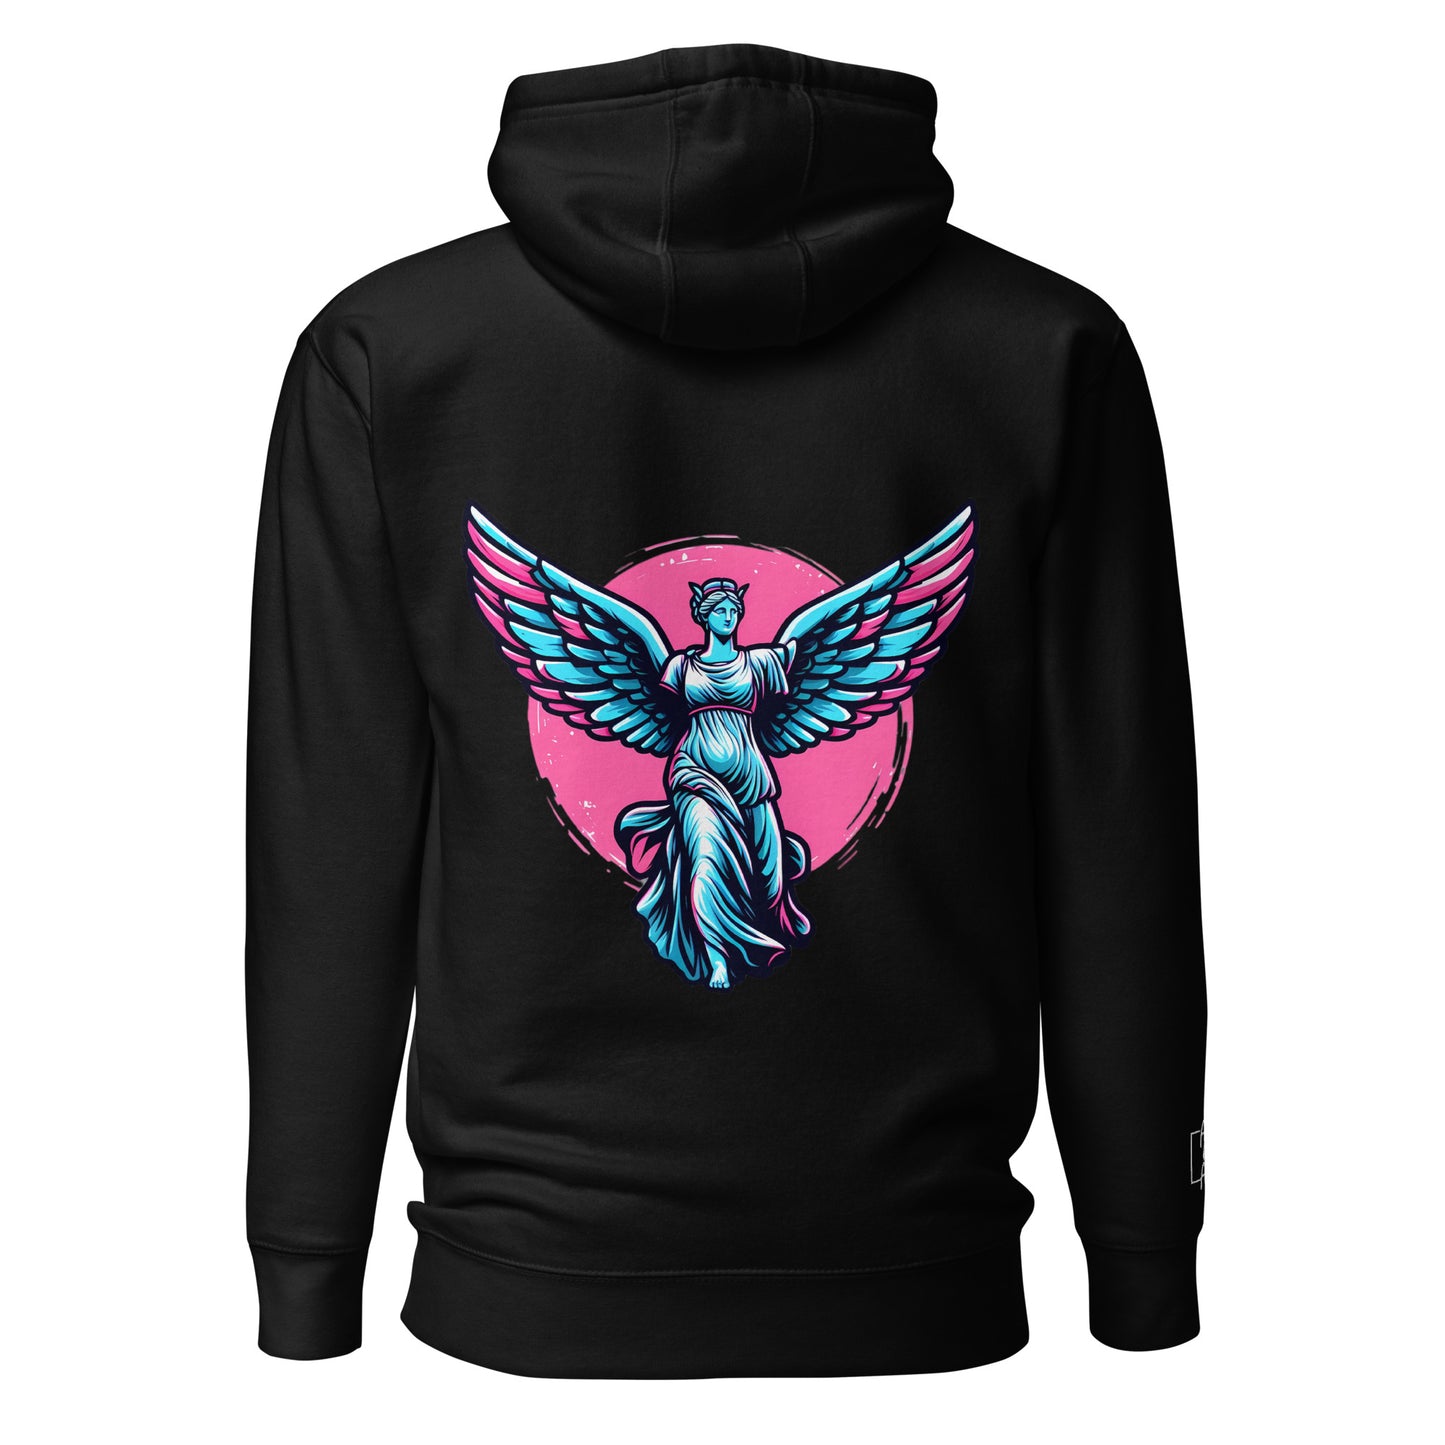 ART BY ART COLLECTION "LA VICTORIA"-Hoodie